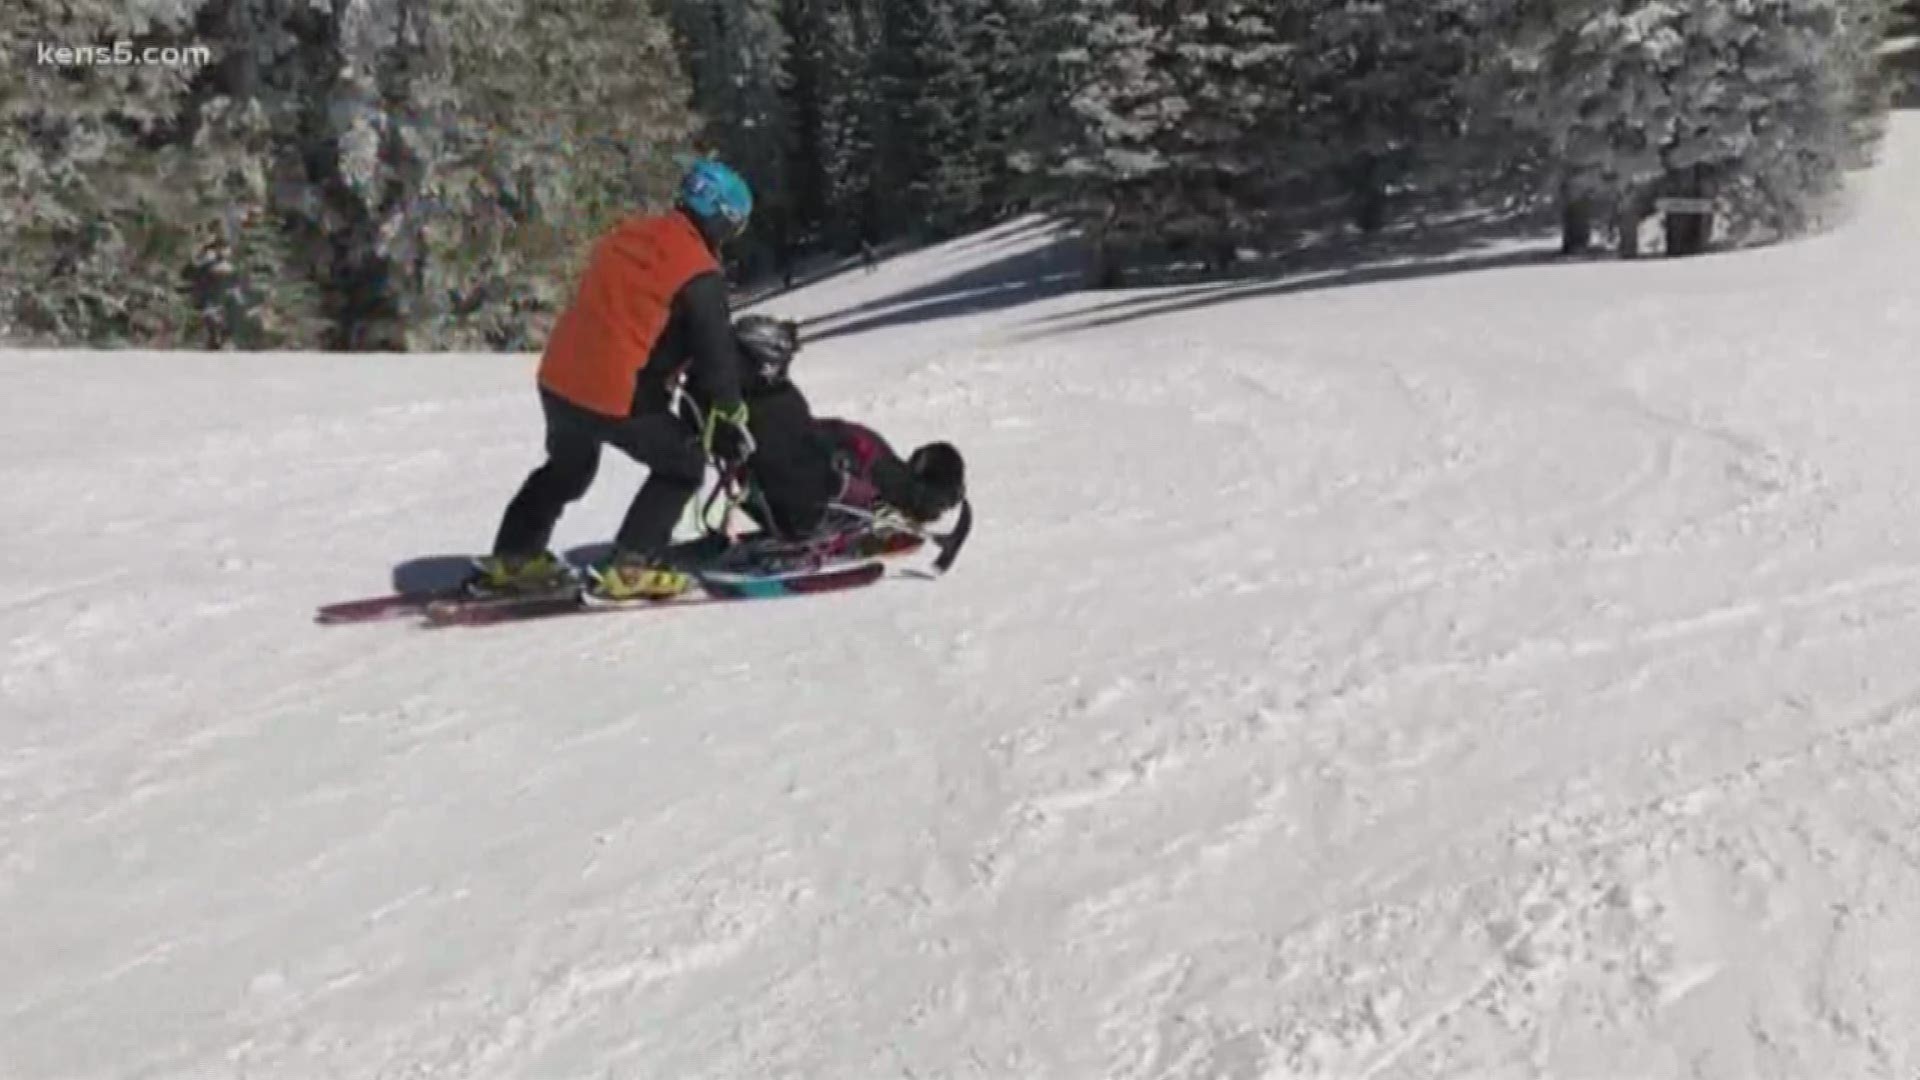 For many with physical disabilities, doing daily tasks like driving or going to the grocery store can be extremely difficult.

33-year-old Lauren Lamb crossed skiing her bucket list in the mountains of New Mexico in March.